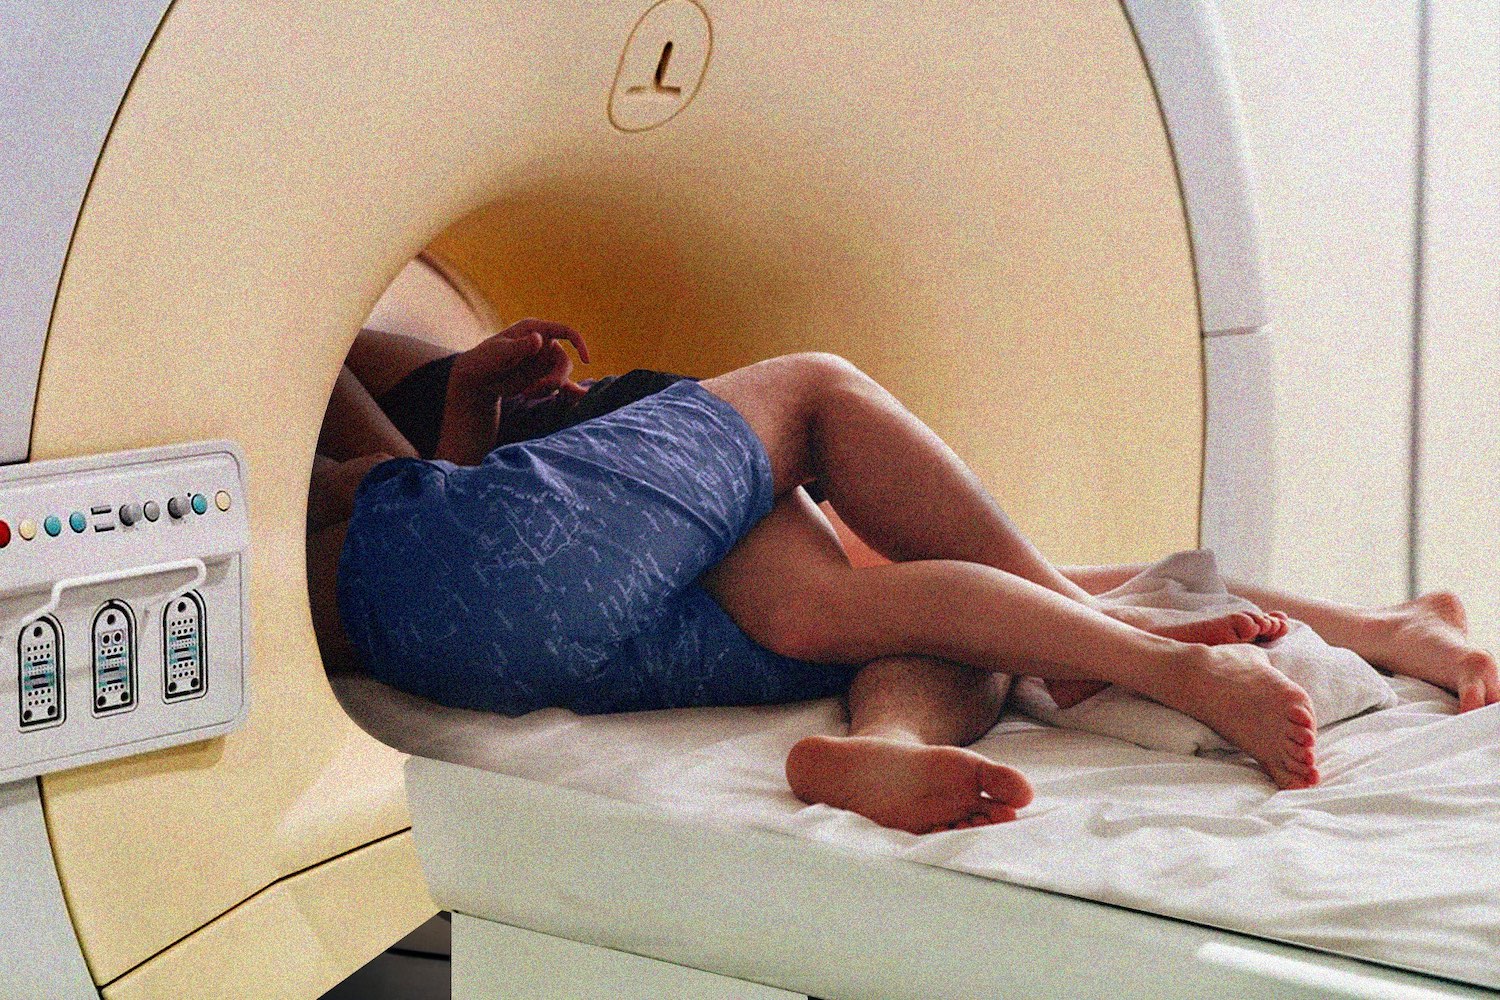 The Story of the Couple Who Shagged in an MRI Machine for Science